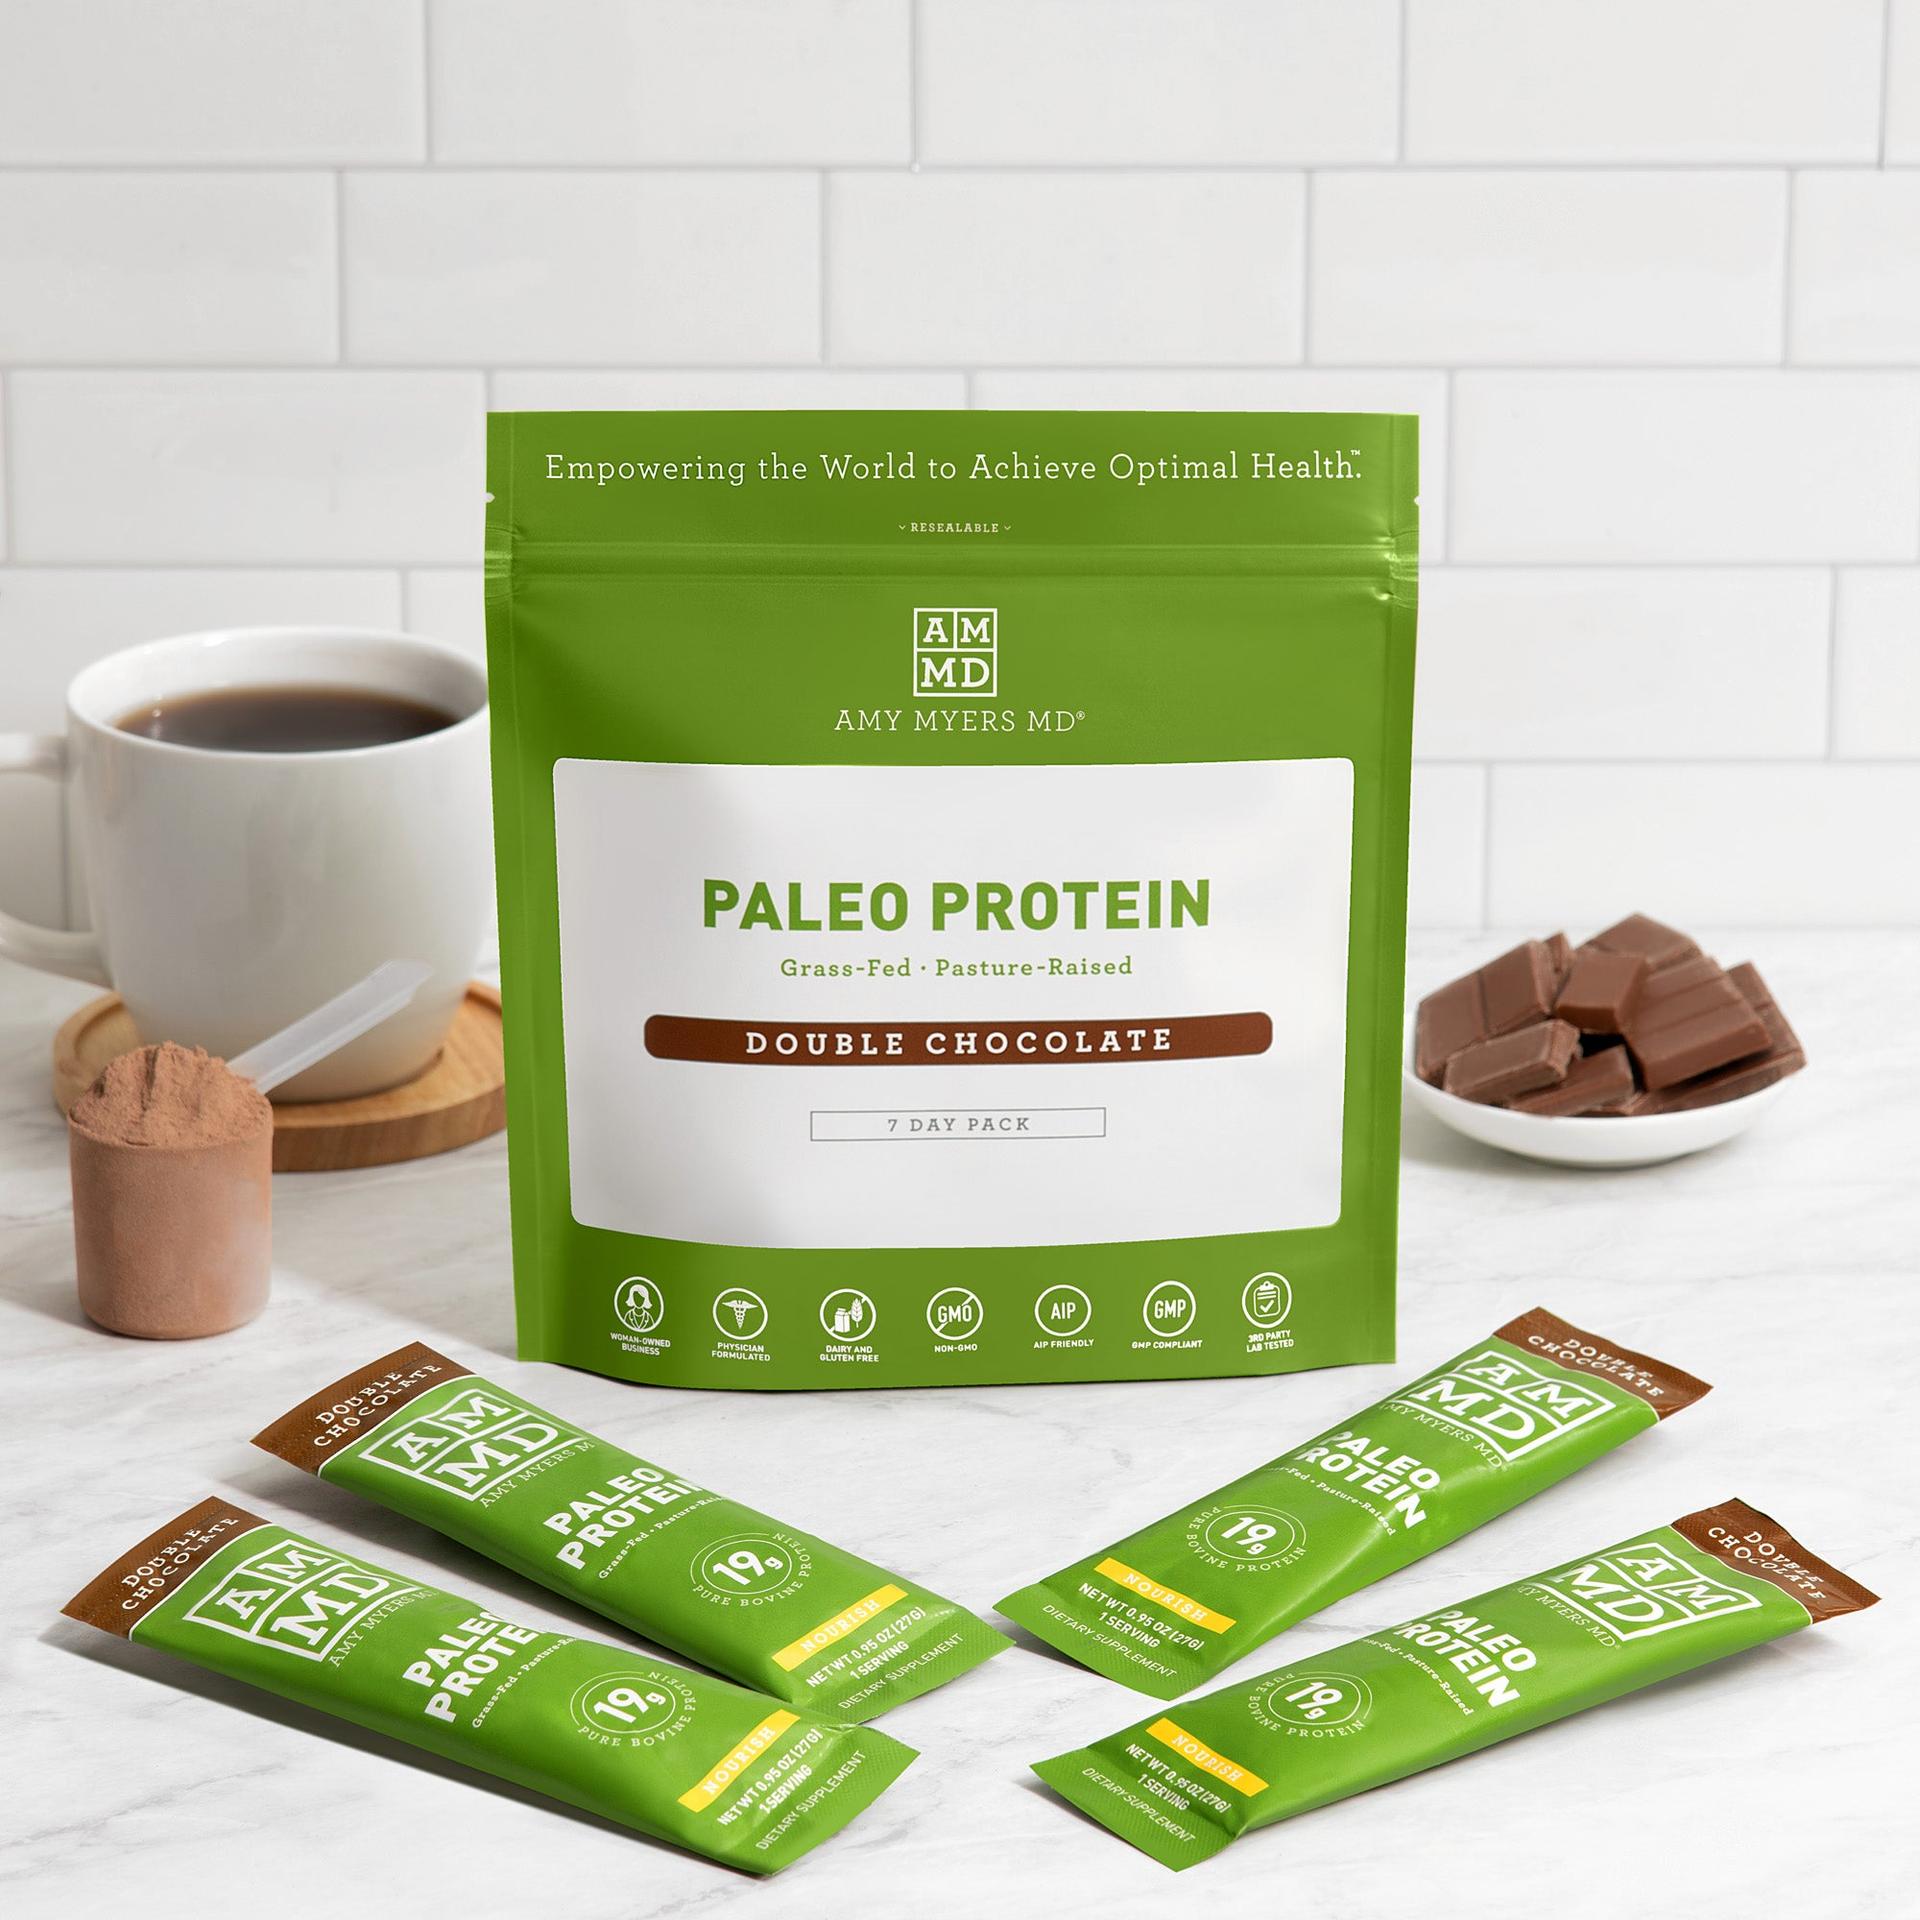 A pouch of Paleo Protein - Double Chocolate 7 Day Pack with single serving packets - Featured Image - Amy Myers MD